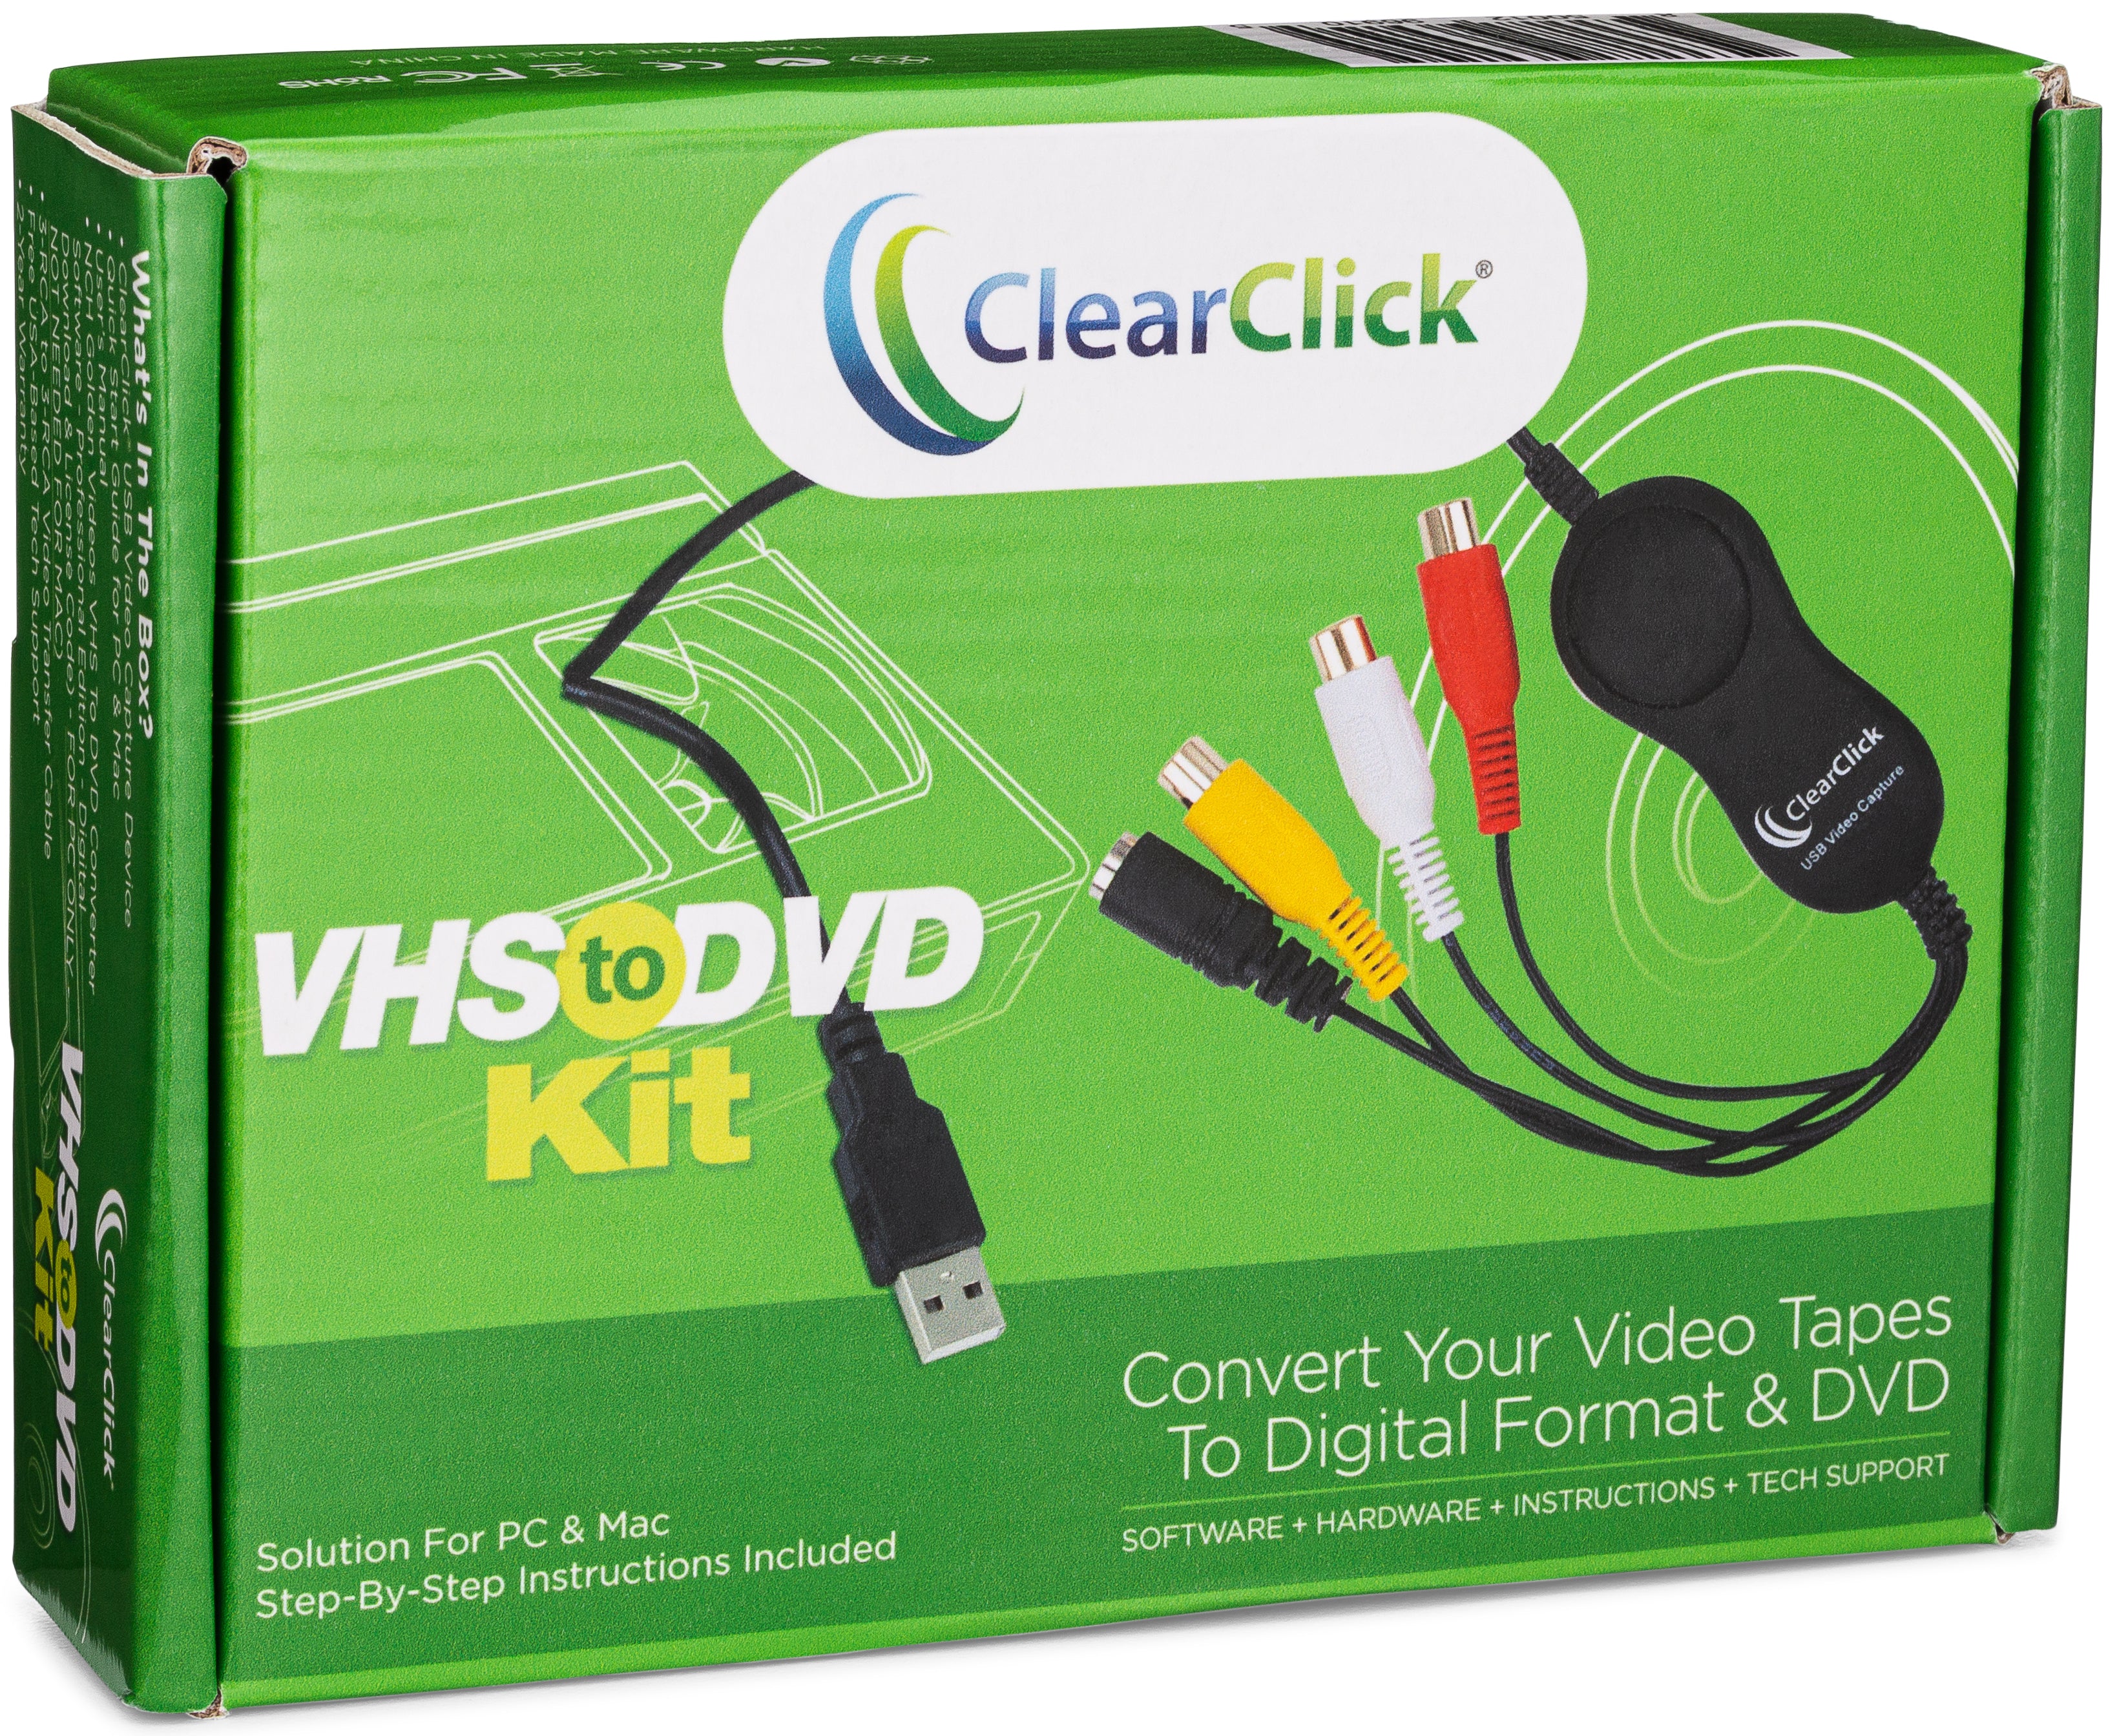 how to convert vhs tapes to digital video